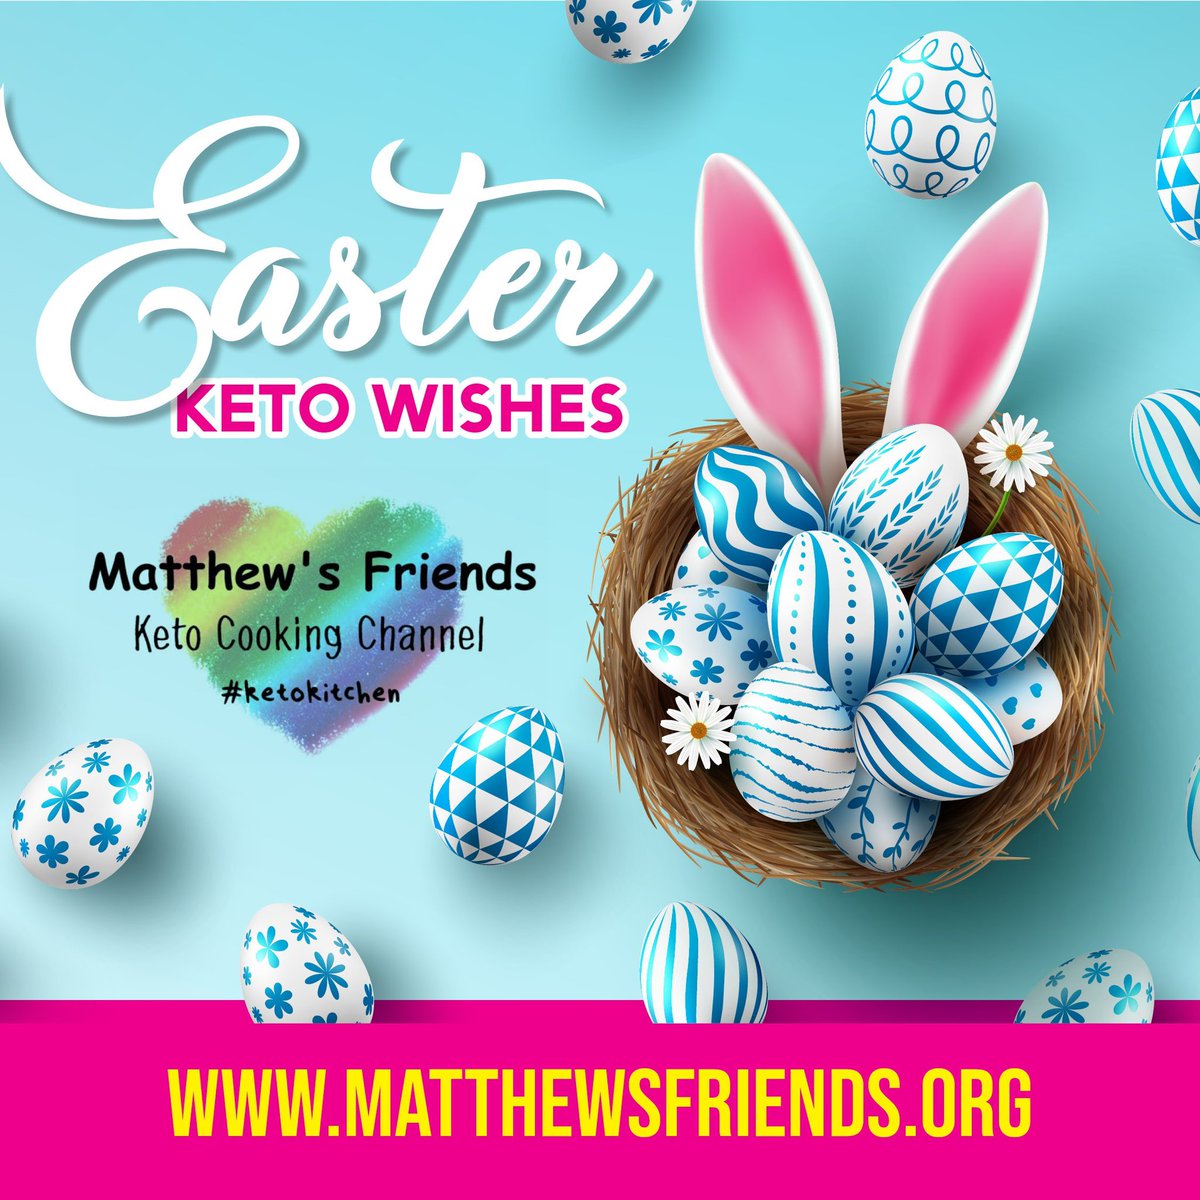 A very Happy Easter from all the team at Matthew’s Friends! #happyeaster #ketogenicdiet